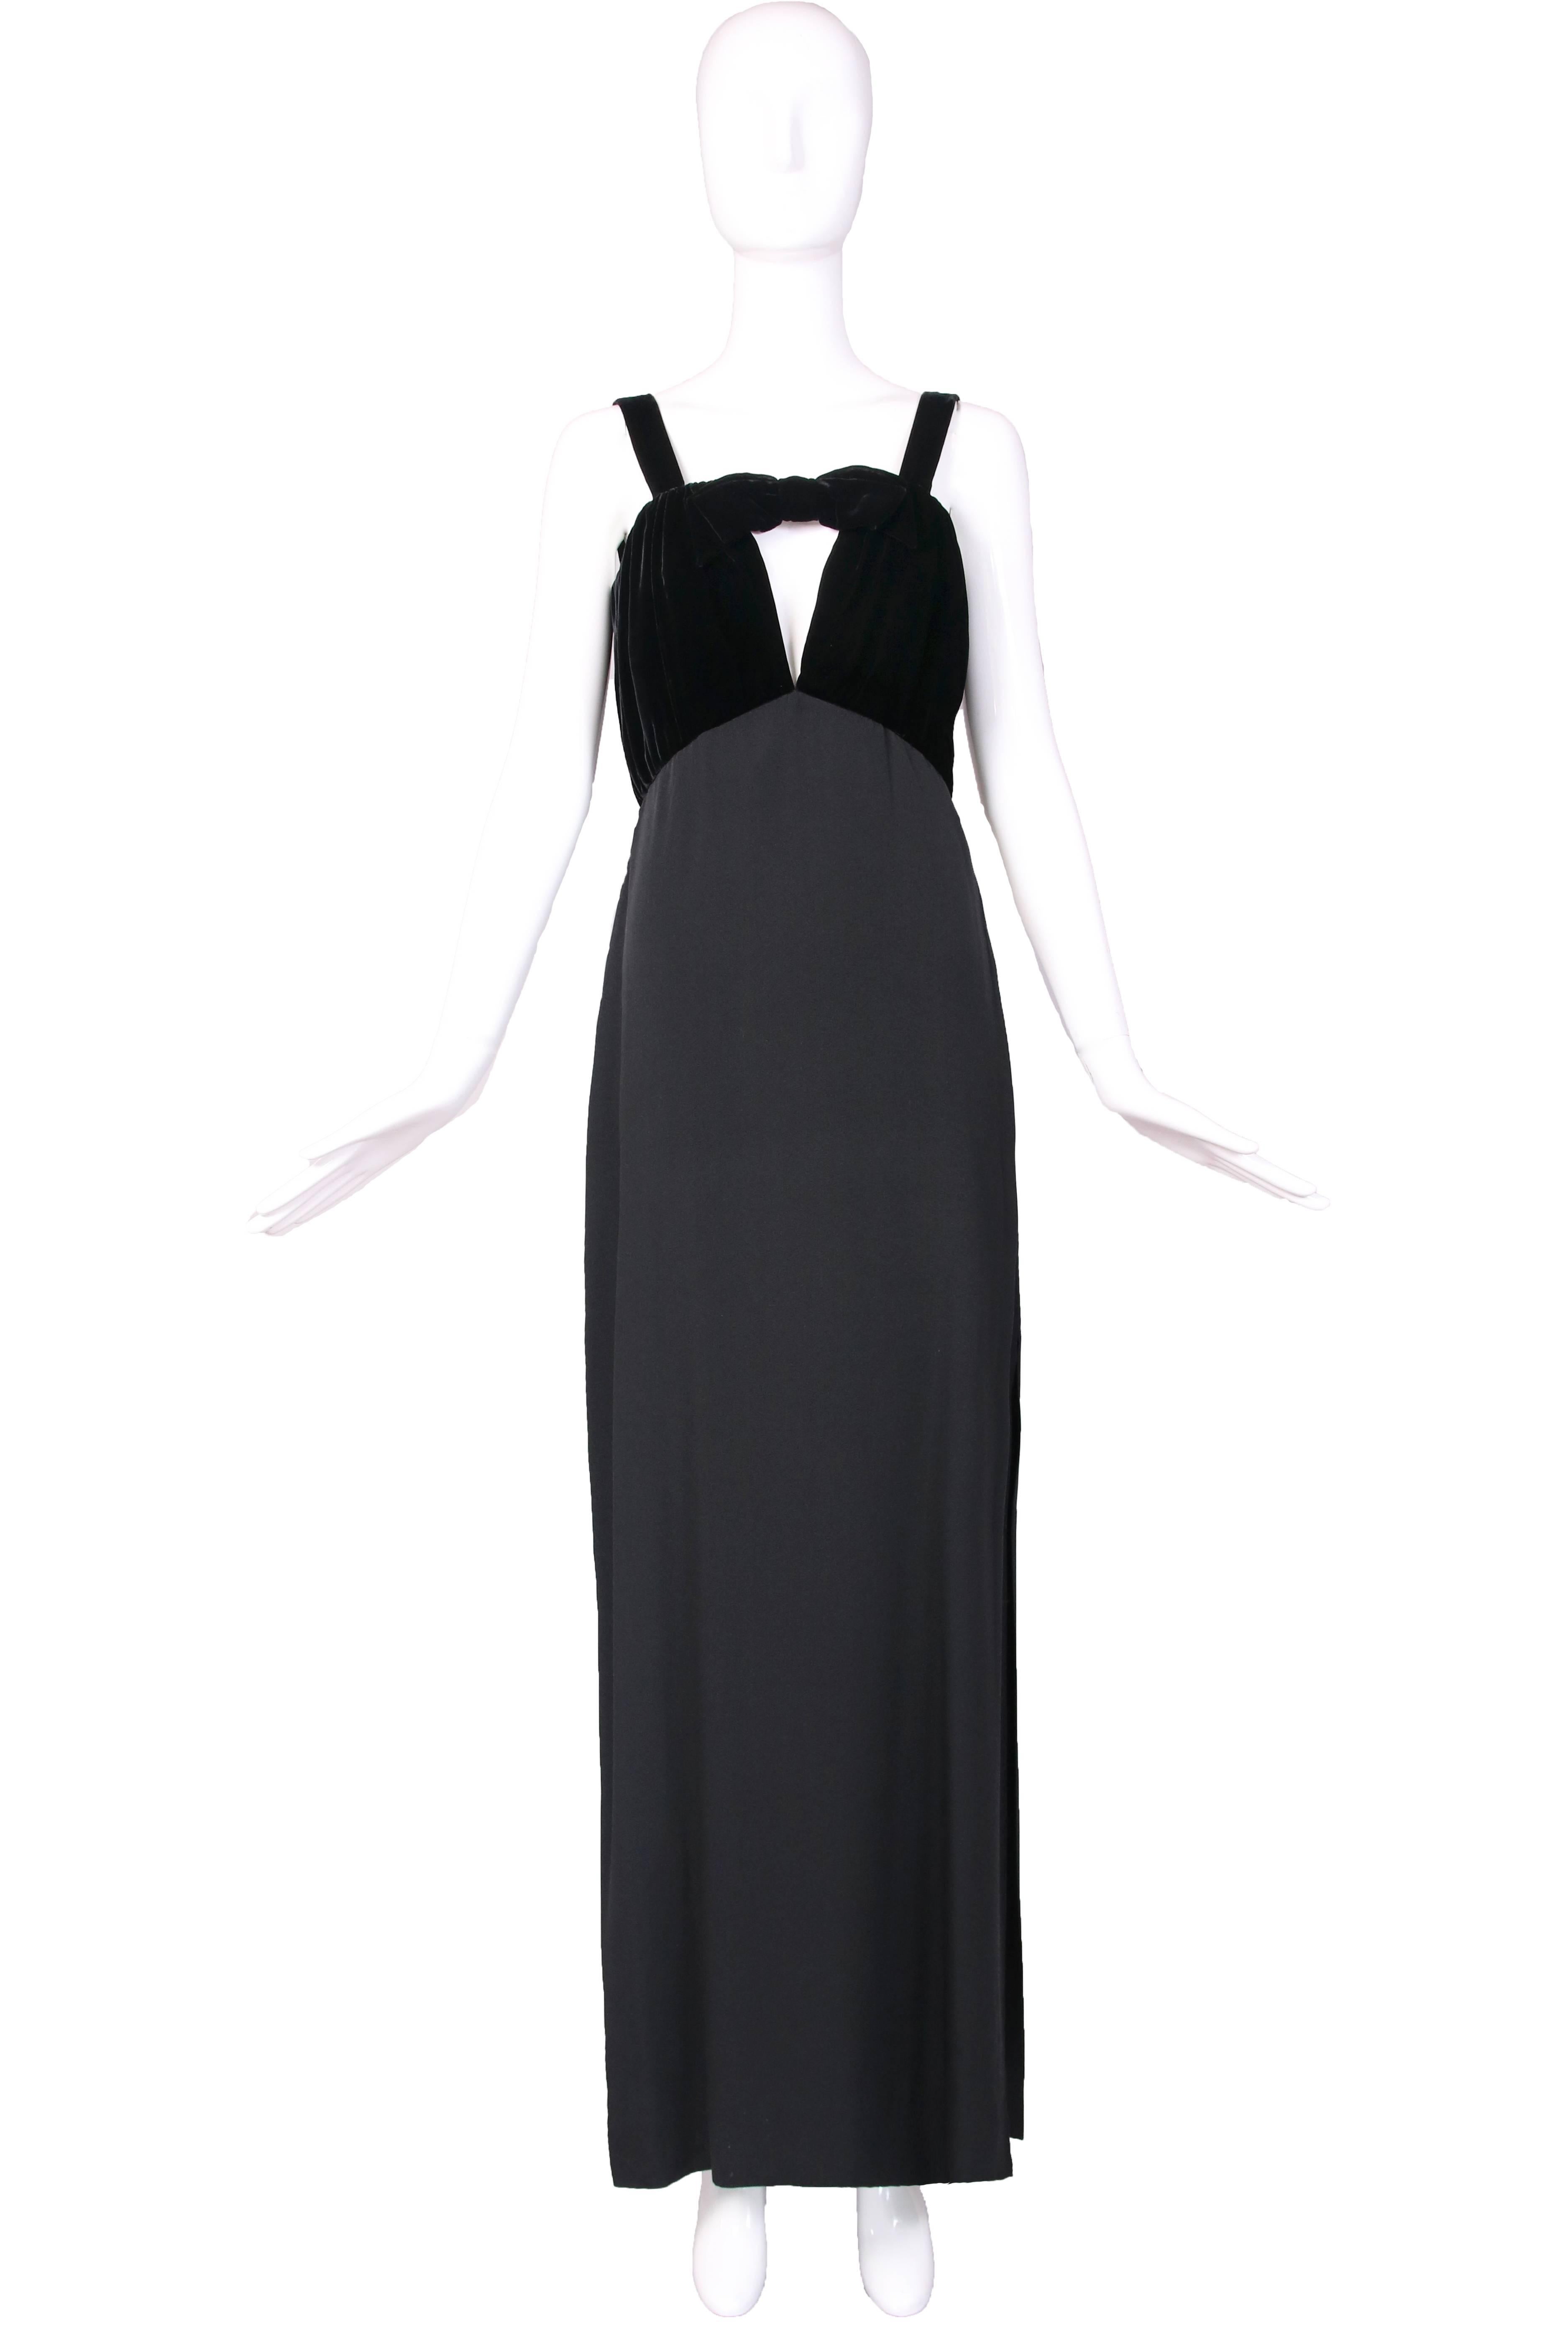 1989 Yves Saint Laurent black silk evening gown with velvet bodice and keyhole v-neckline featuring a velvet bow. Dramatic side slit at bottom left of skirt. In excellent condition. Size 40.
MEASUREMENTS:
Bust - 34